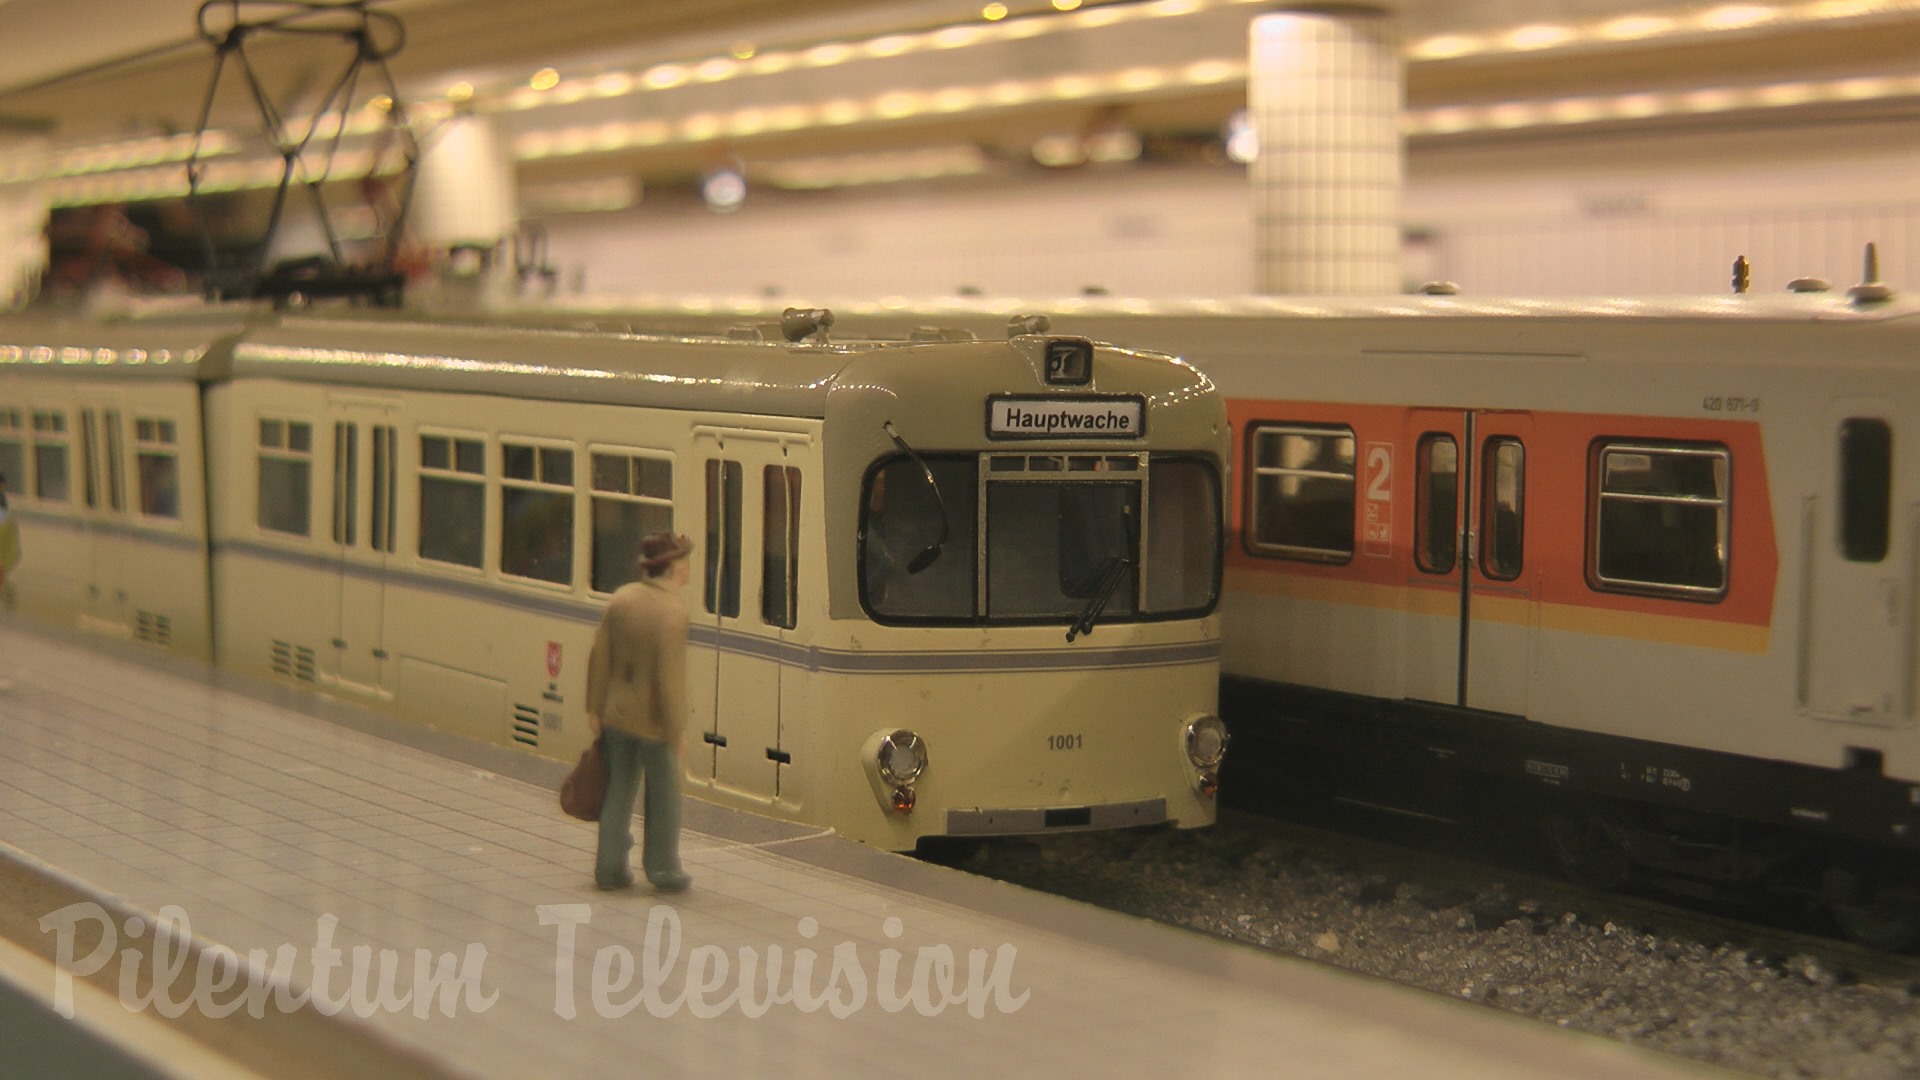 Scale Model of a Metro Station with Underground, Subway and Rapid Transit Trains in HO Scale